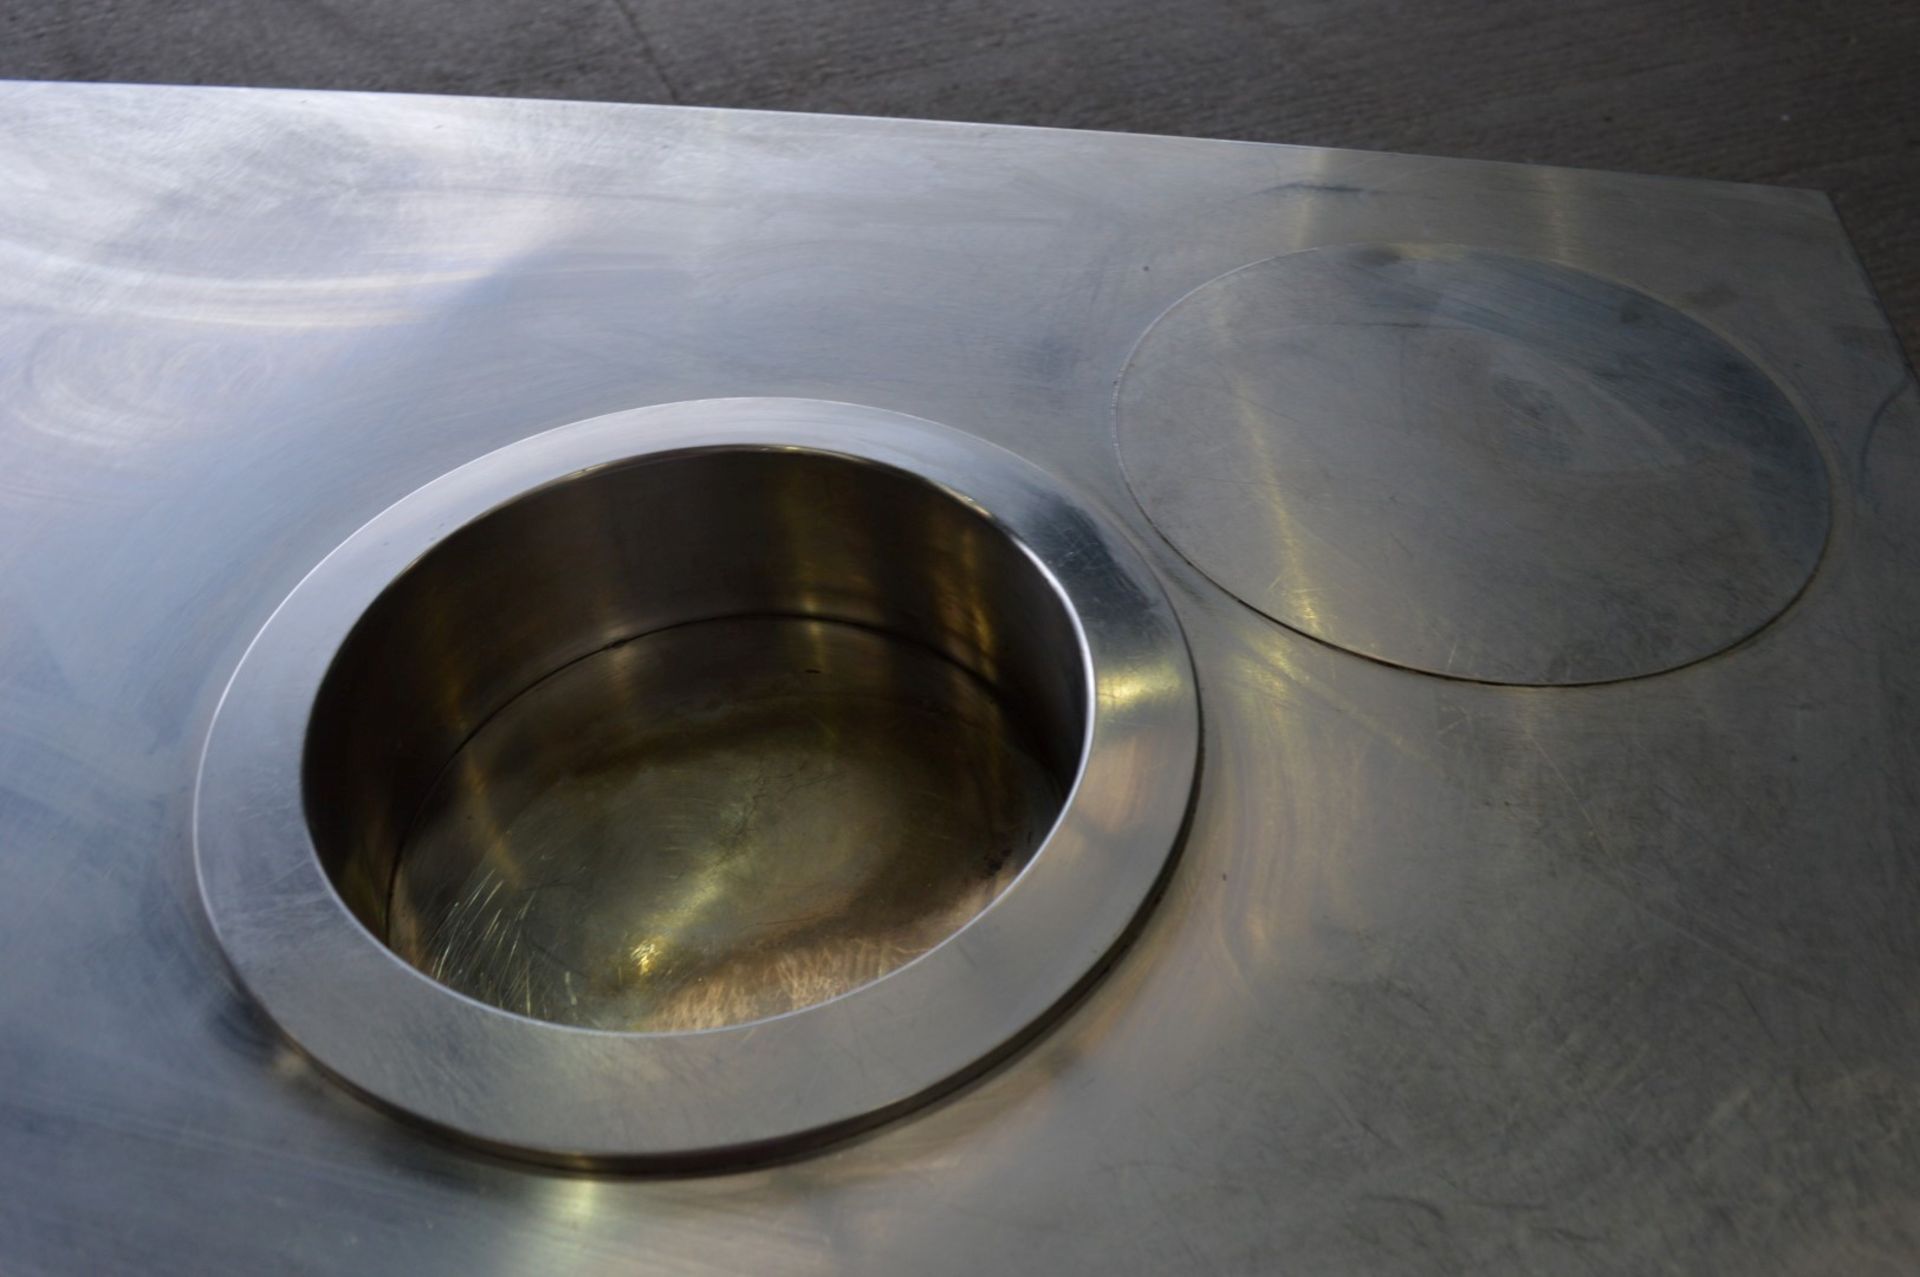 1 x Serving Counter With Stainless Steel Top and Plate Dispenser - On Castors For - Image 4 of 6